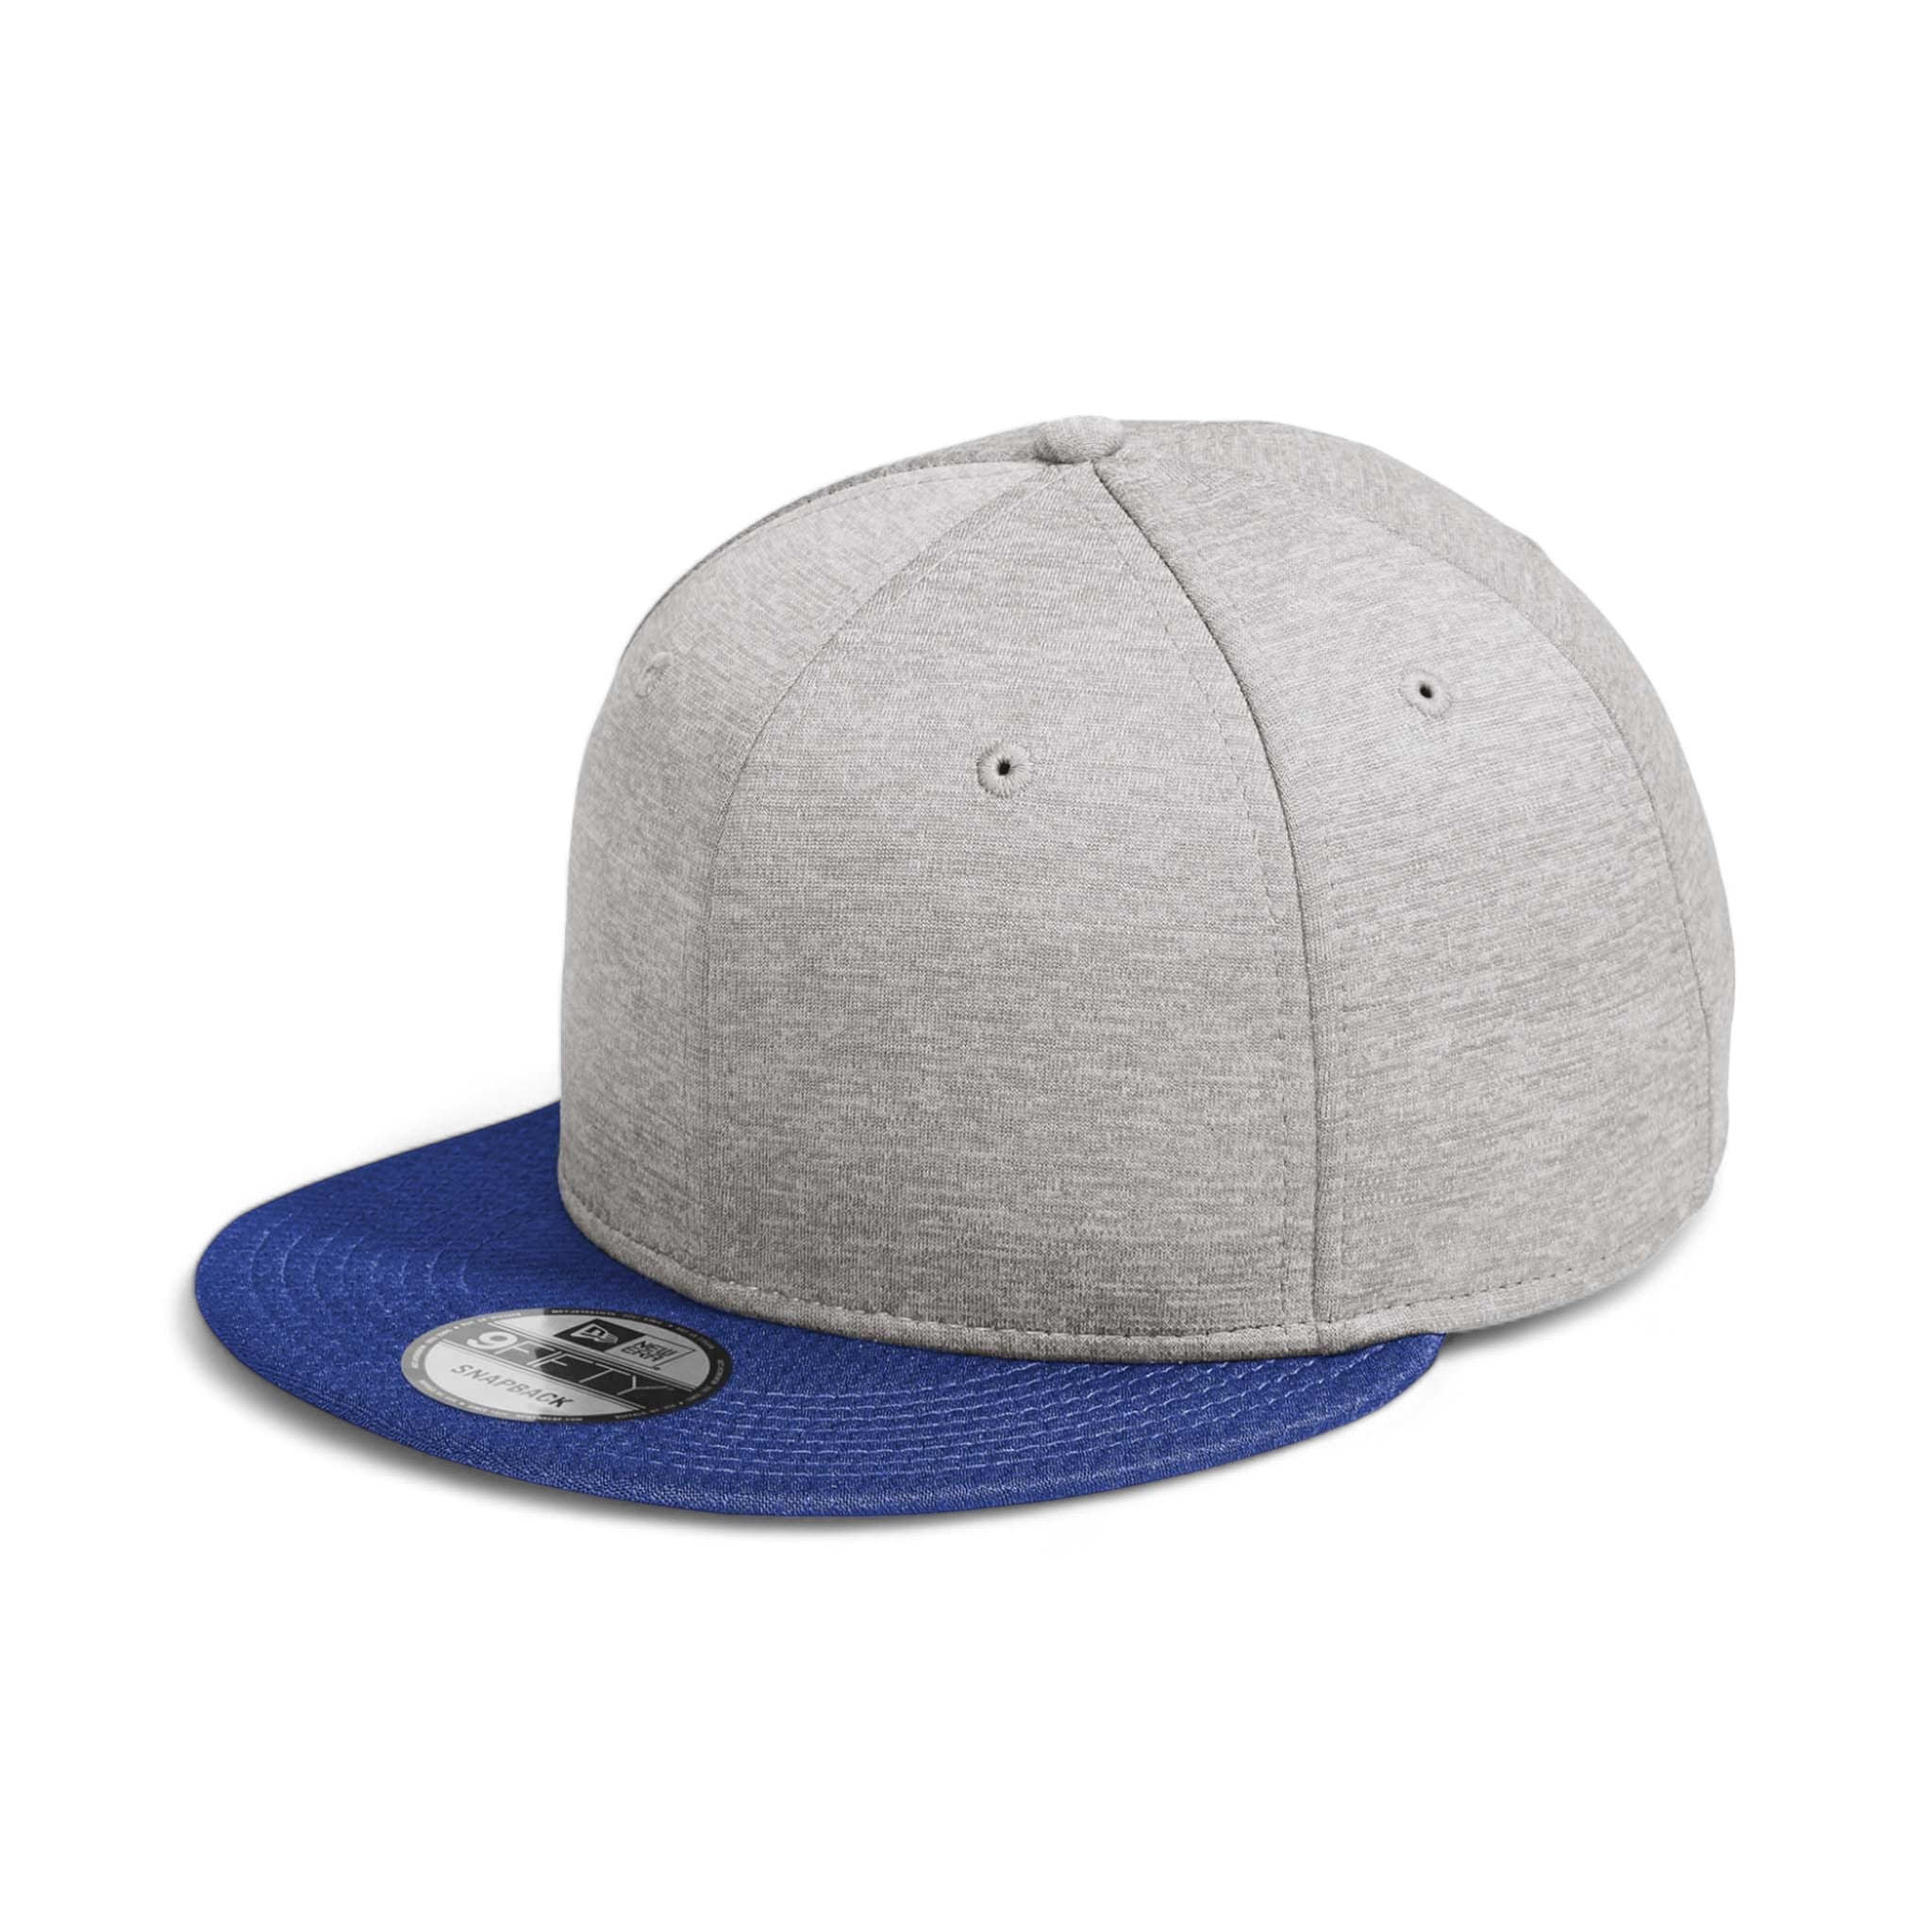 Side view of New Era NE408 custom hat in shadow heather and royal